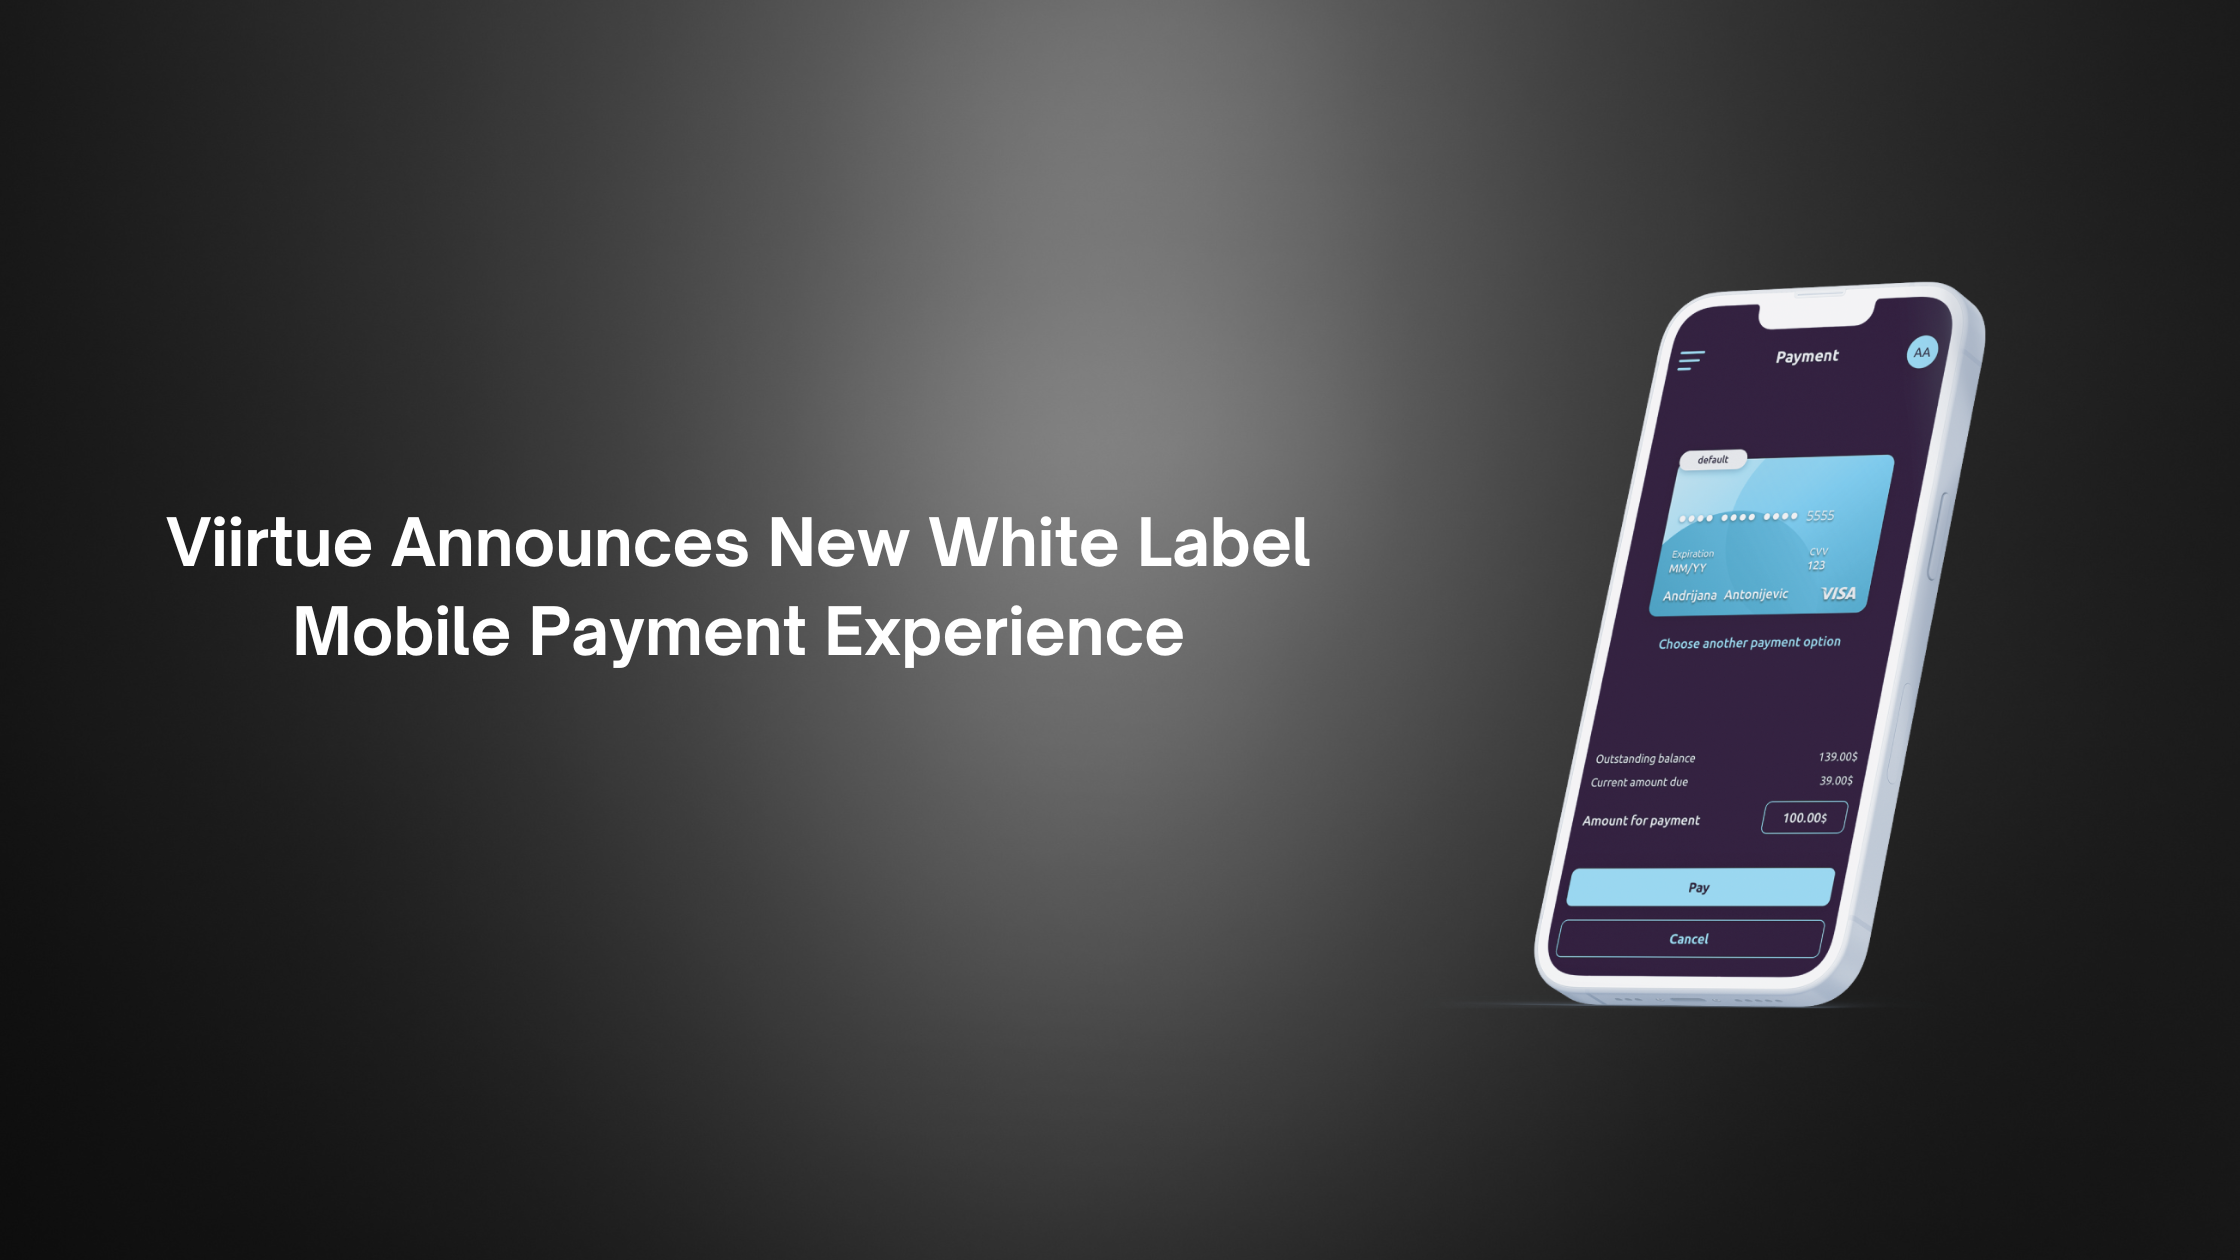 Viirtue Announces New White Label Mobile Payment Experience